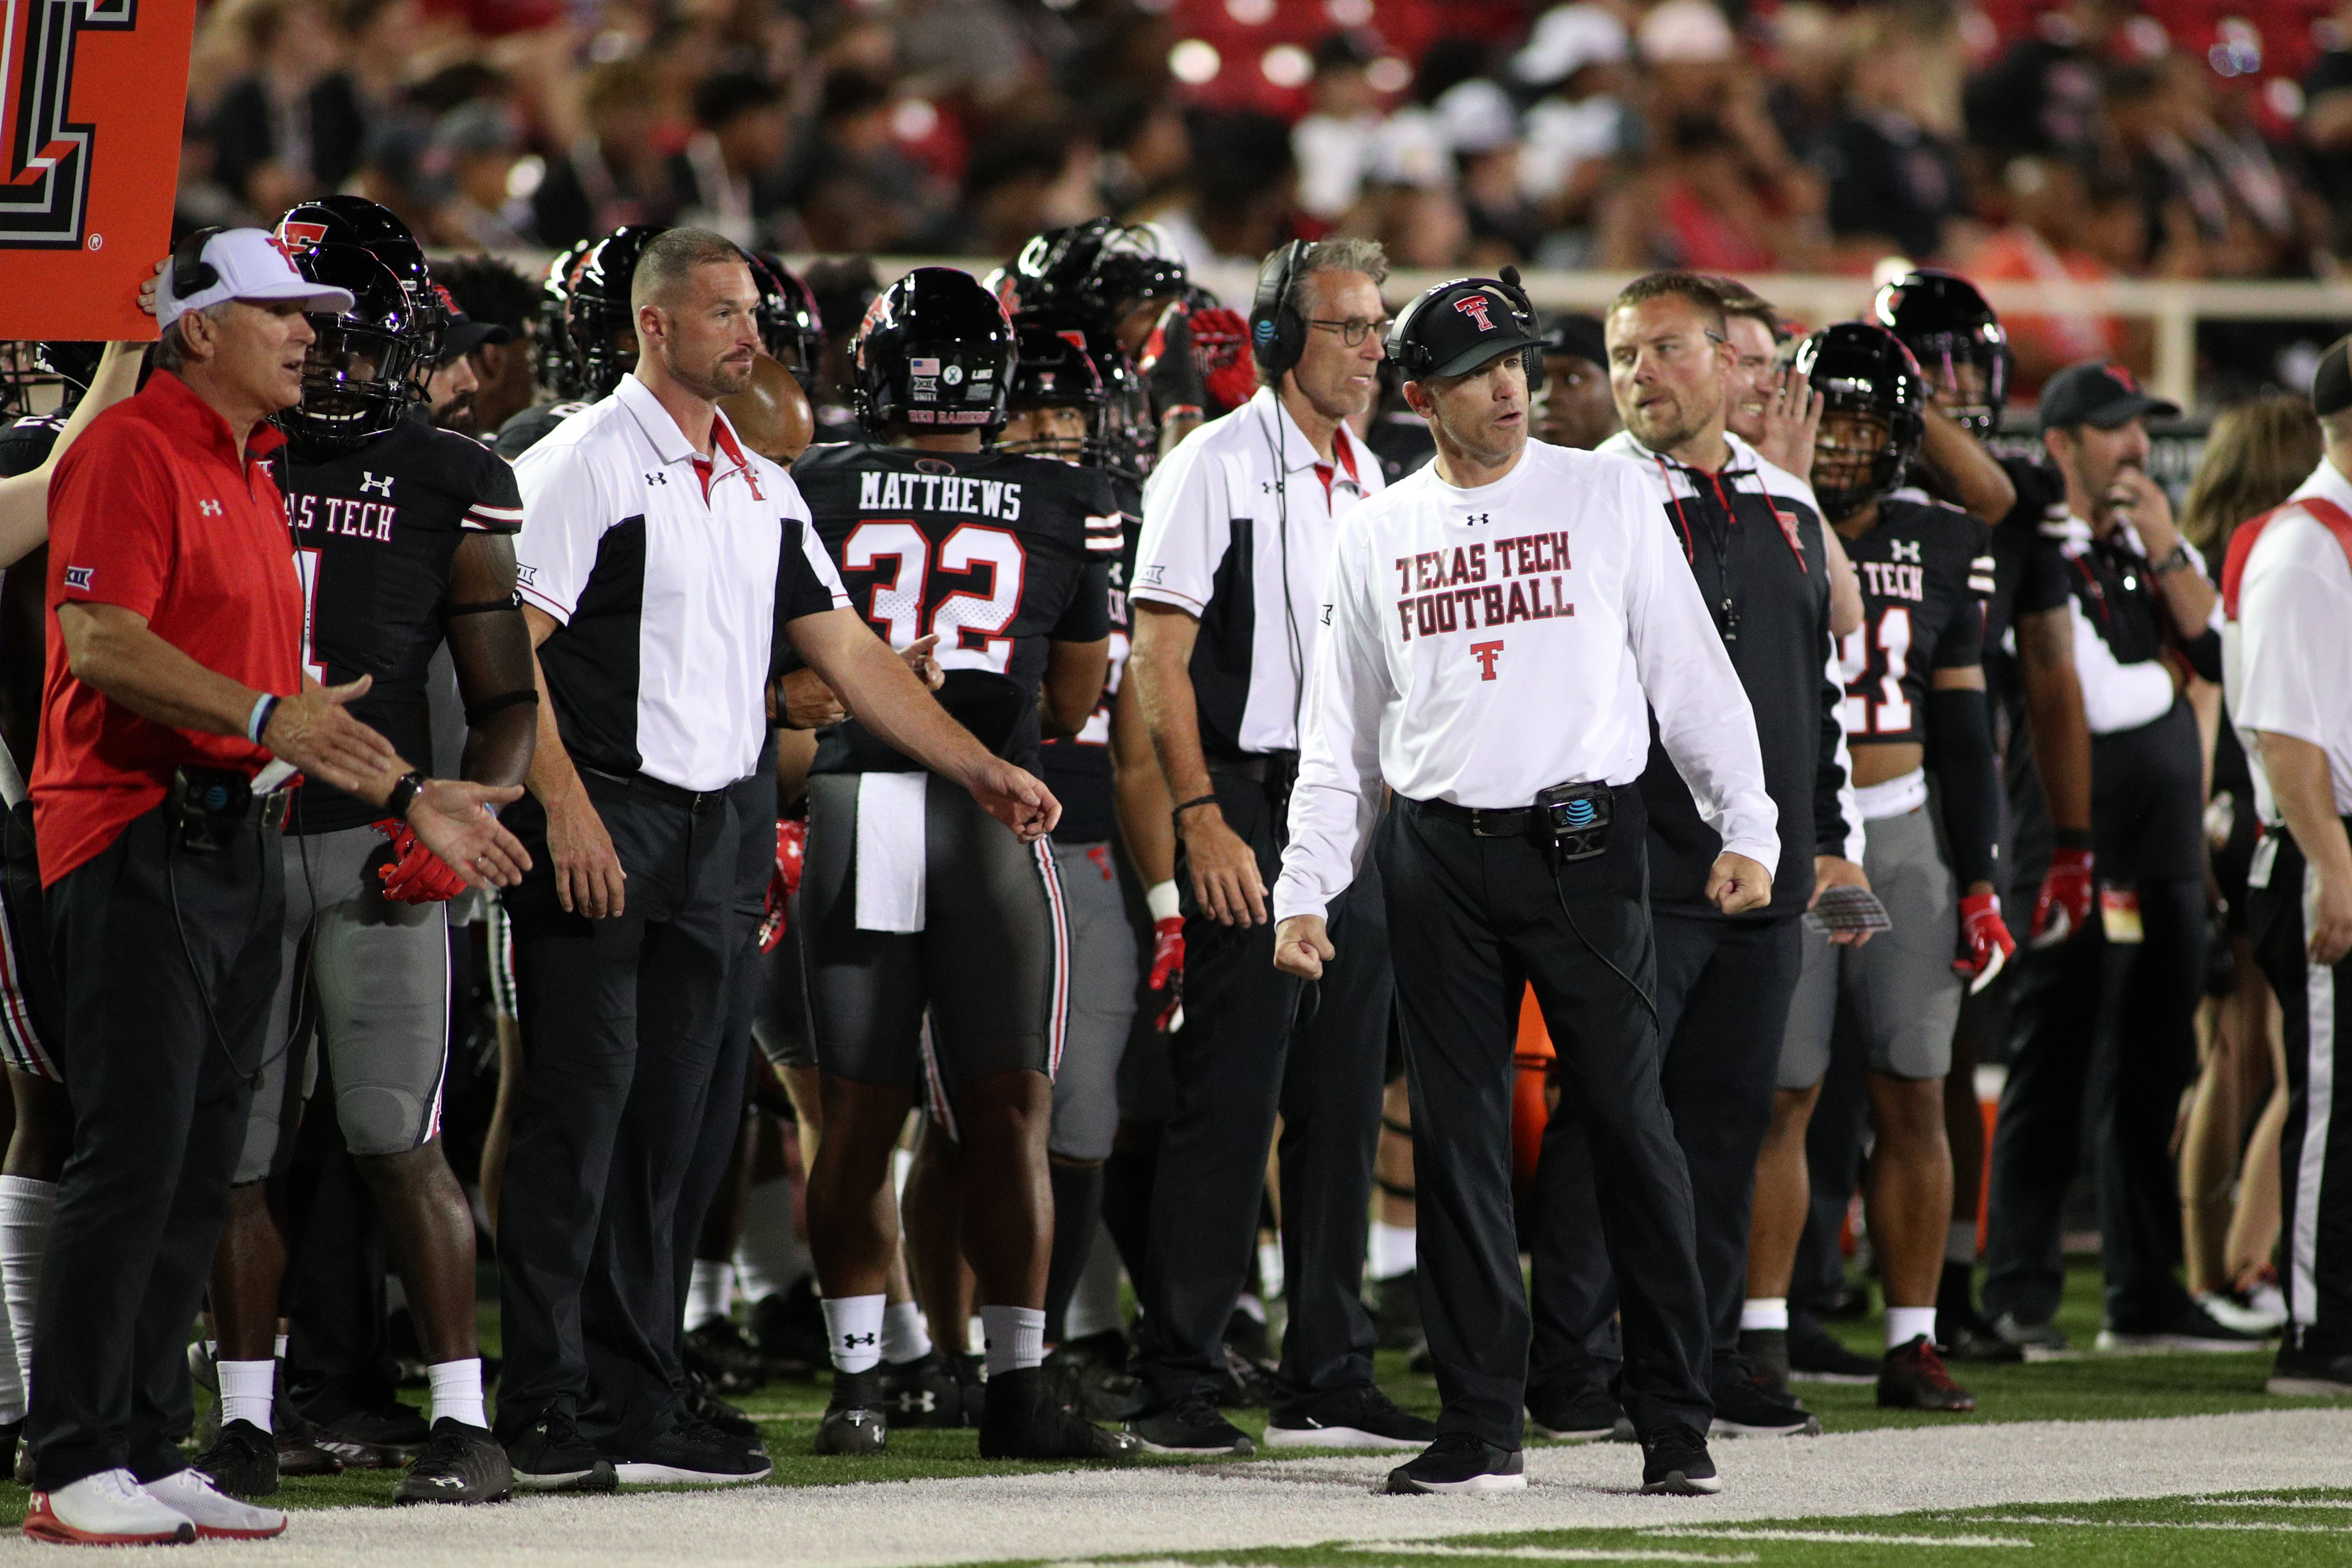 RED RAIDER PODCAST: What's the deal with Texas Tech?